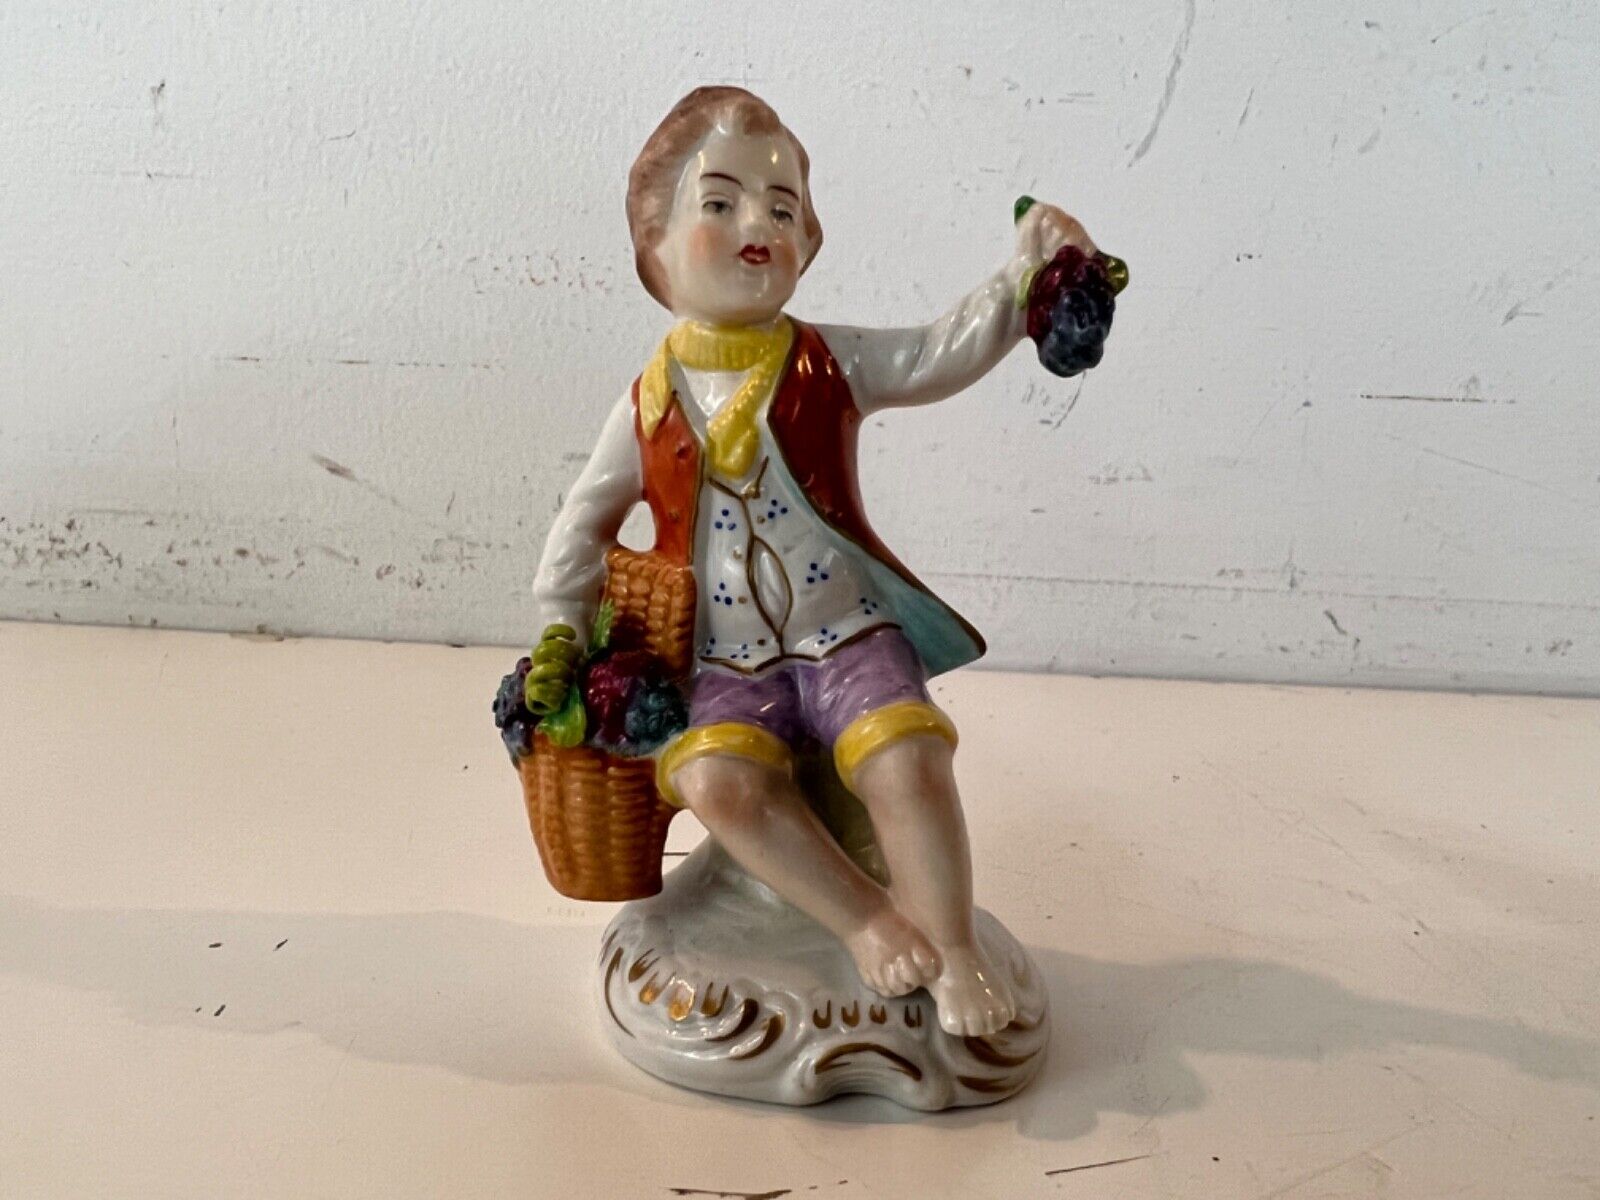 Vintage Early 20th Century Sitzendorf Porcelain Seated Boy with Grapes Figurine